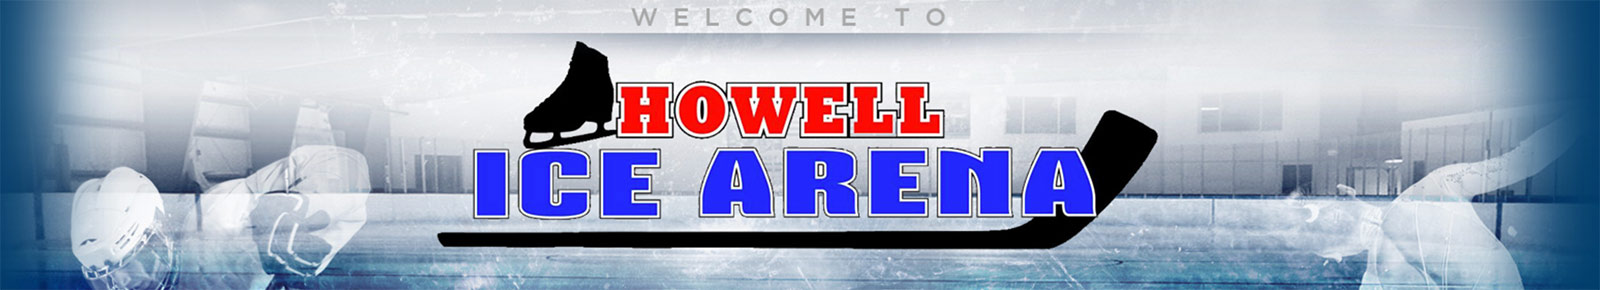 Image of Howell Ice Arena